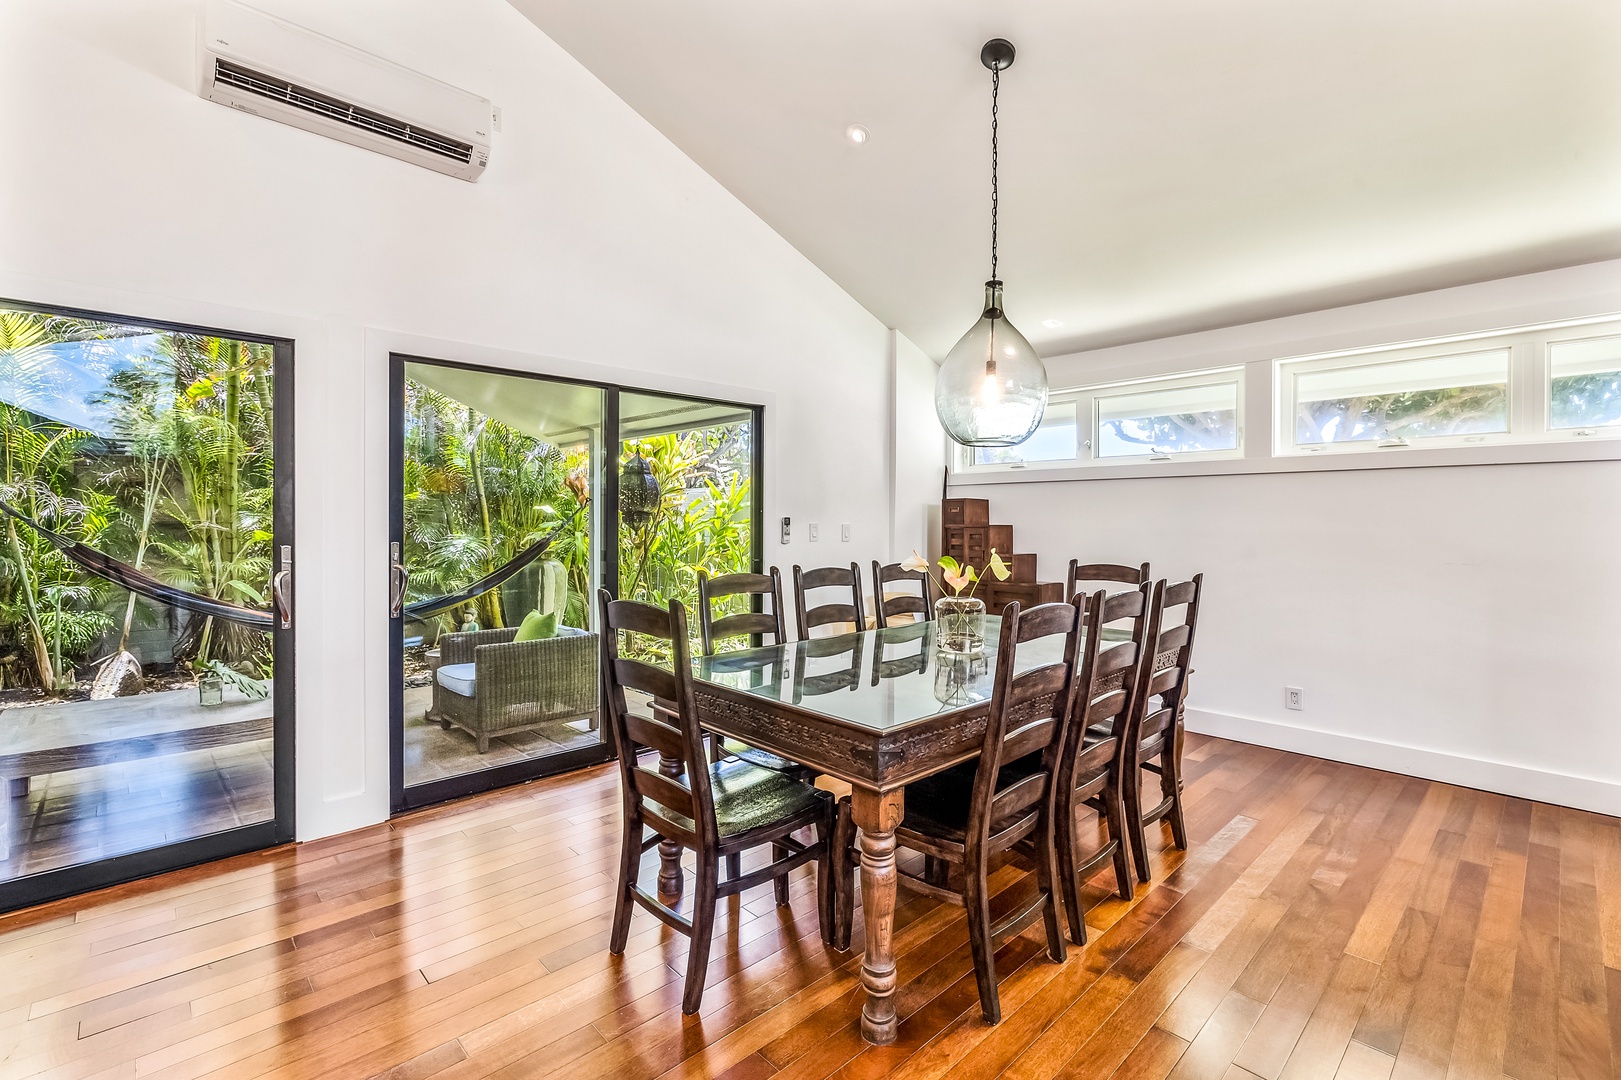 Kailua Vacation Rentals, Hale Ohana - The formal indoor dining area has seating for 8